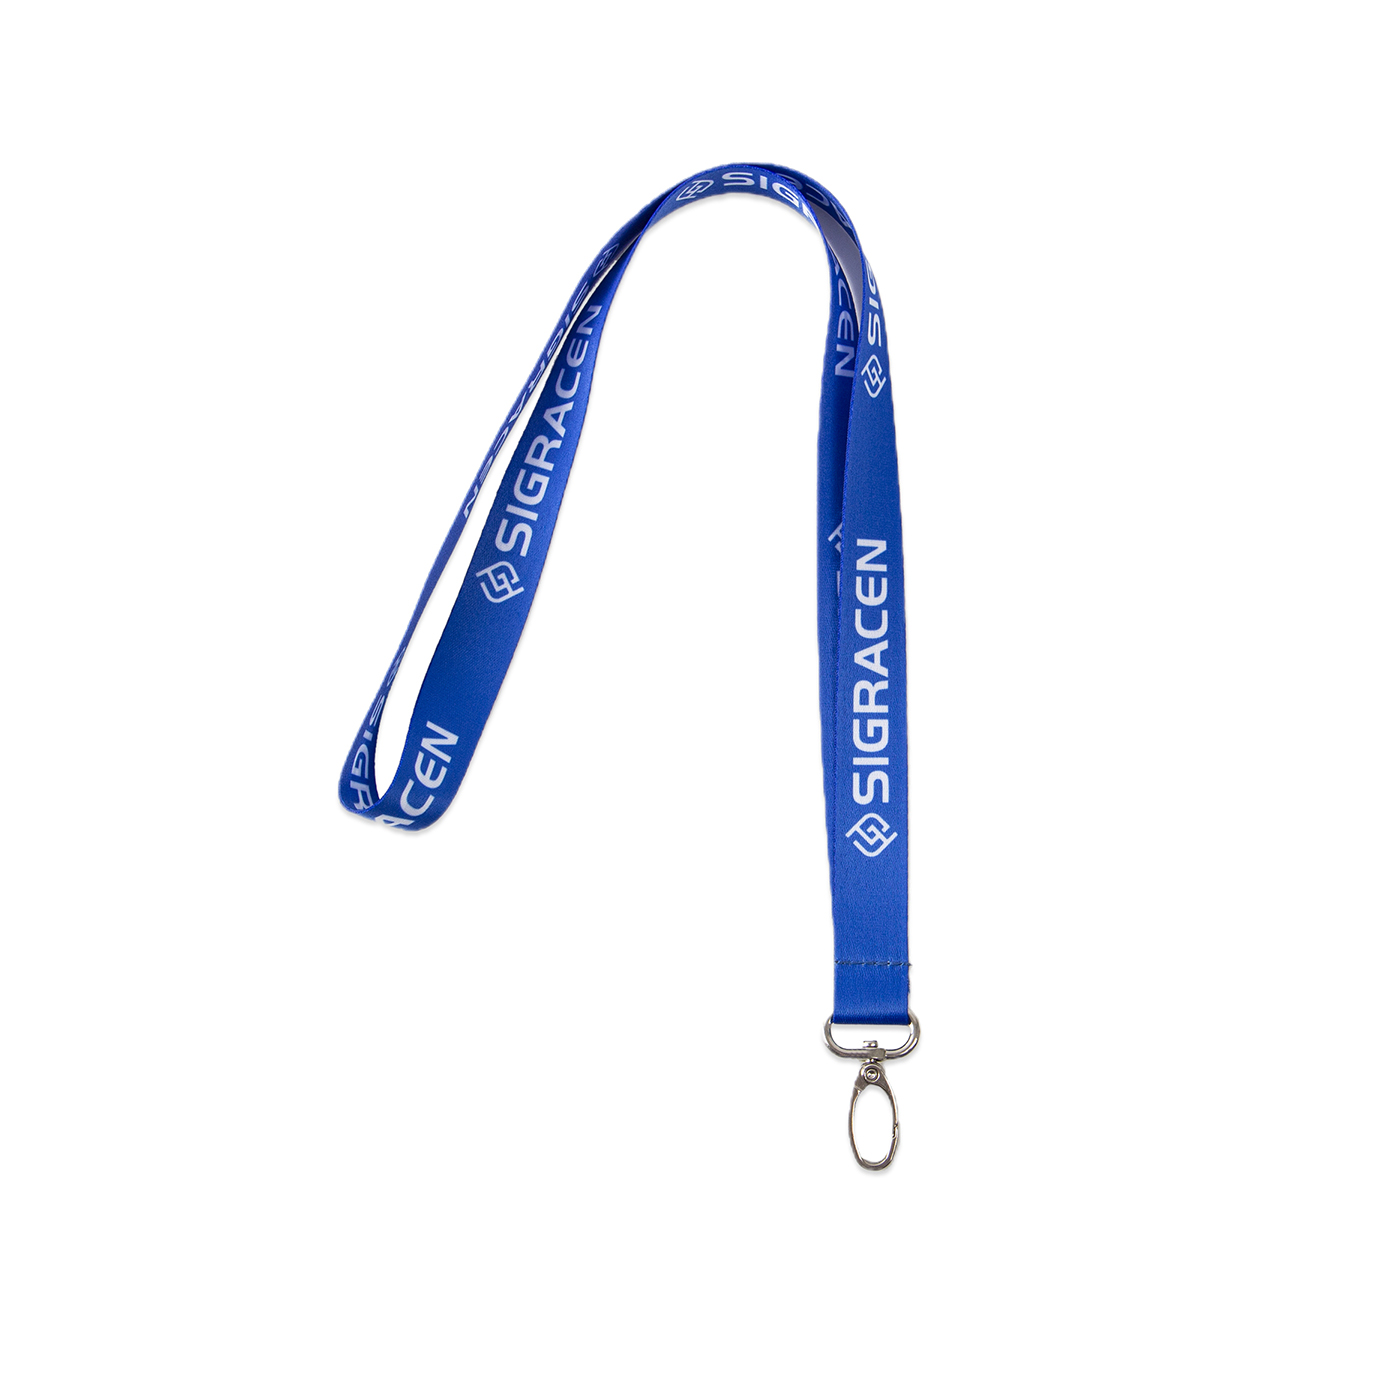 Lanyard With Clasp Buckle2